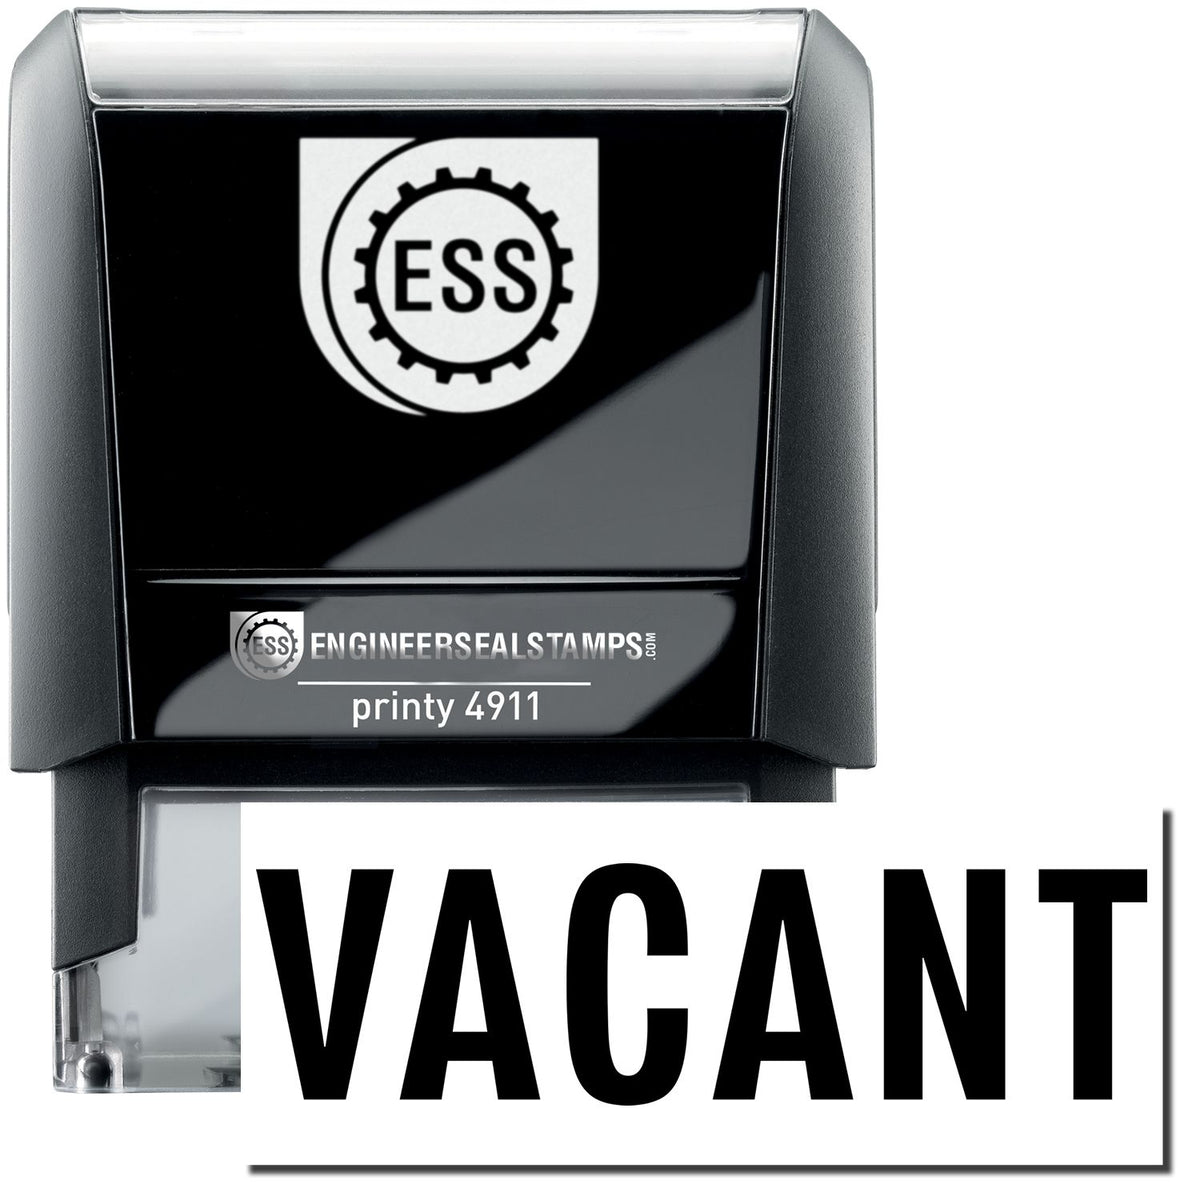 A self-inking stamp with a stamped image showing how the text &quot;VACANT&quot; is displayed after stamping.